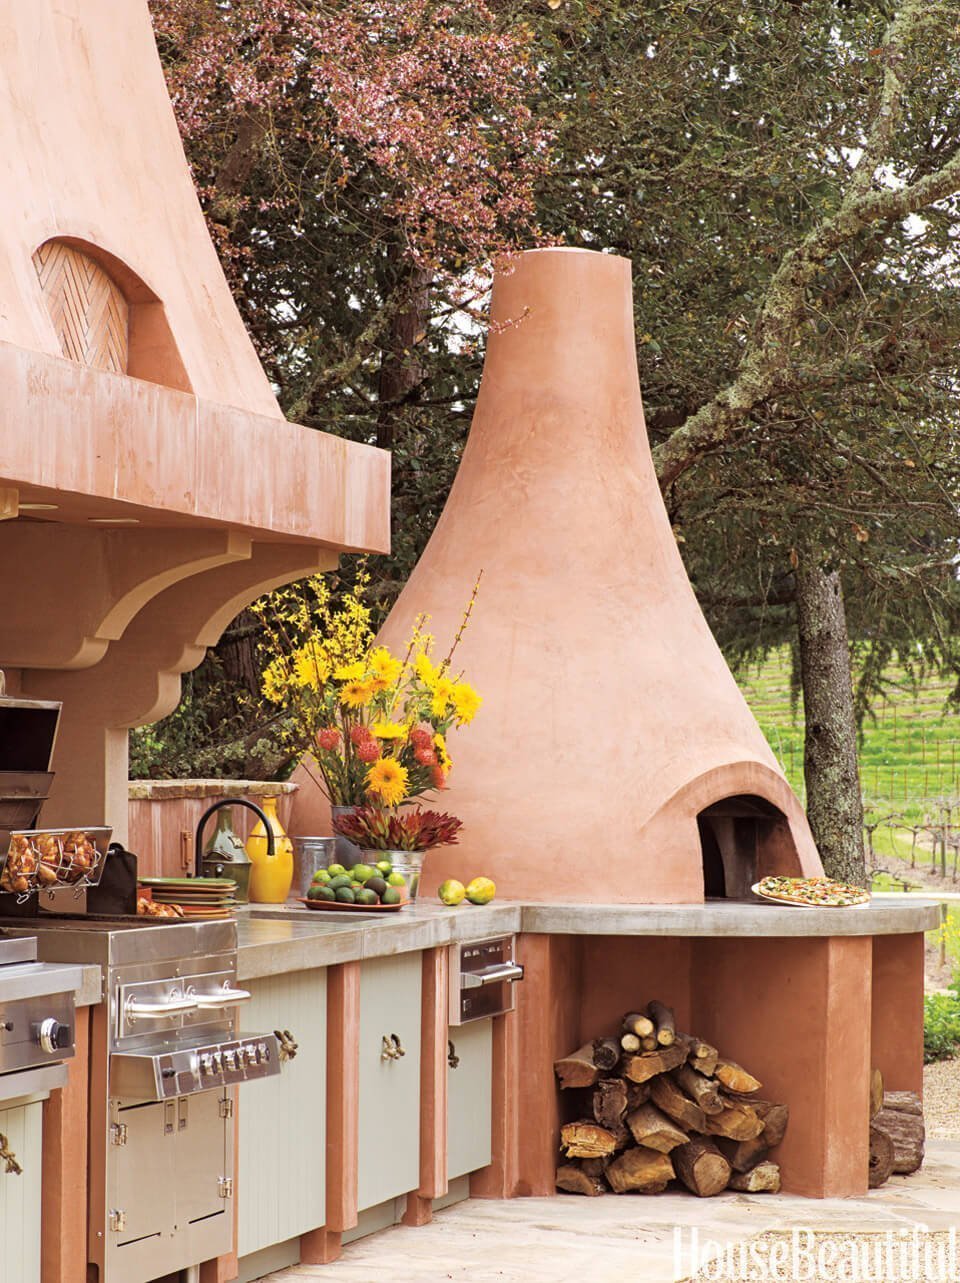 Outdoor Kitchen Décor with Clay Pizza Oven